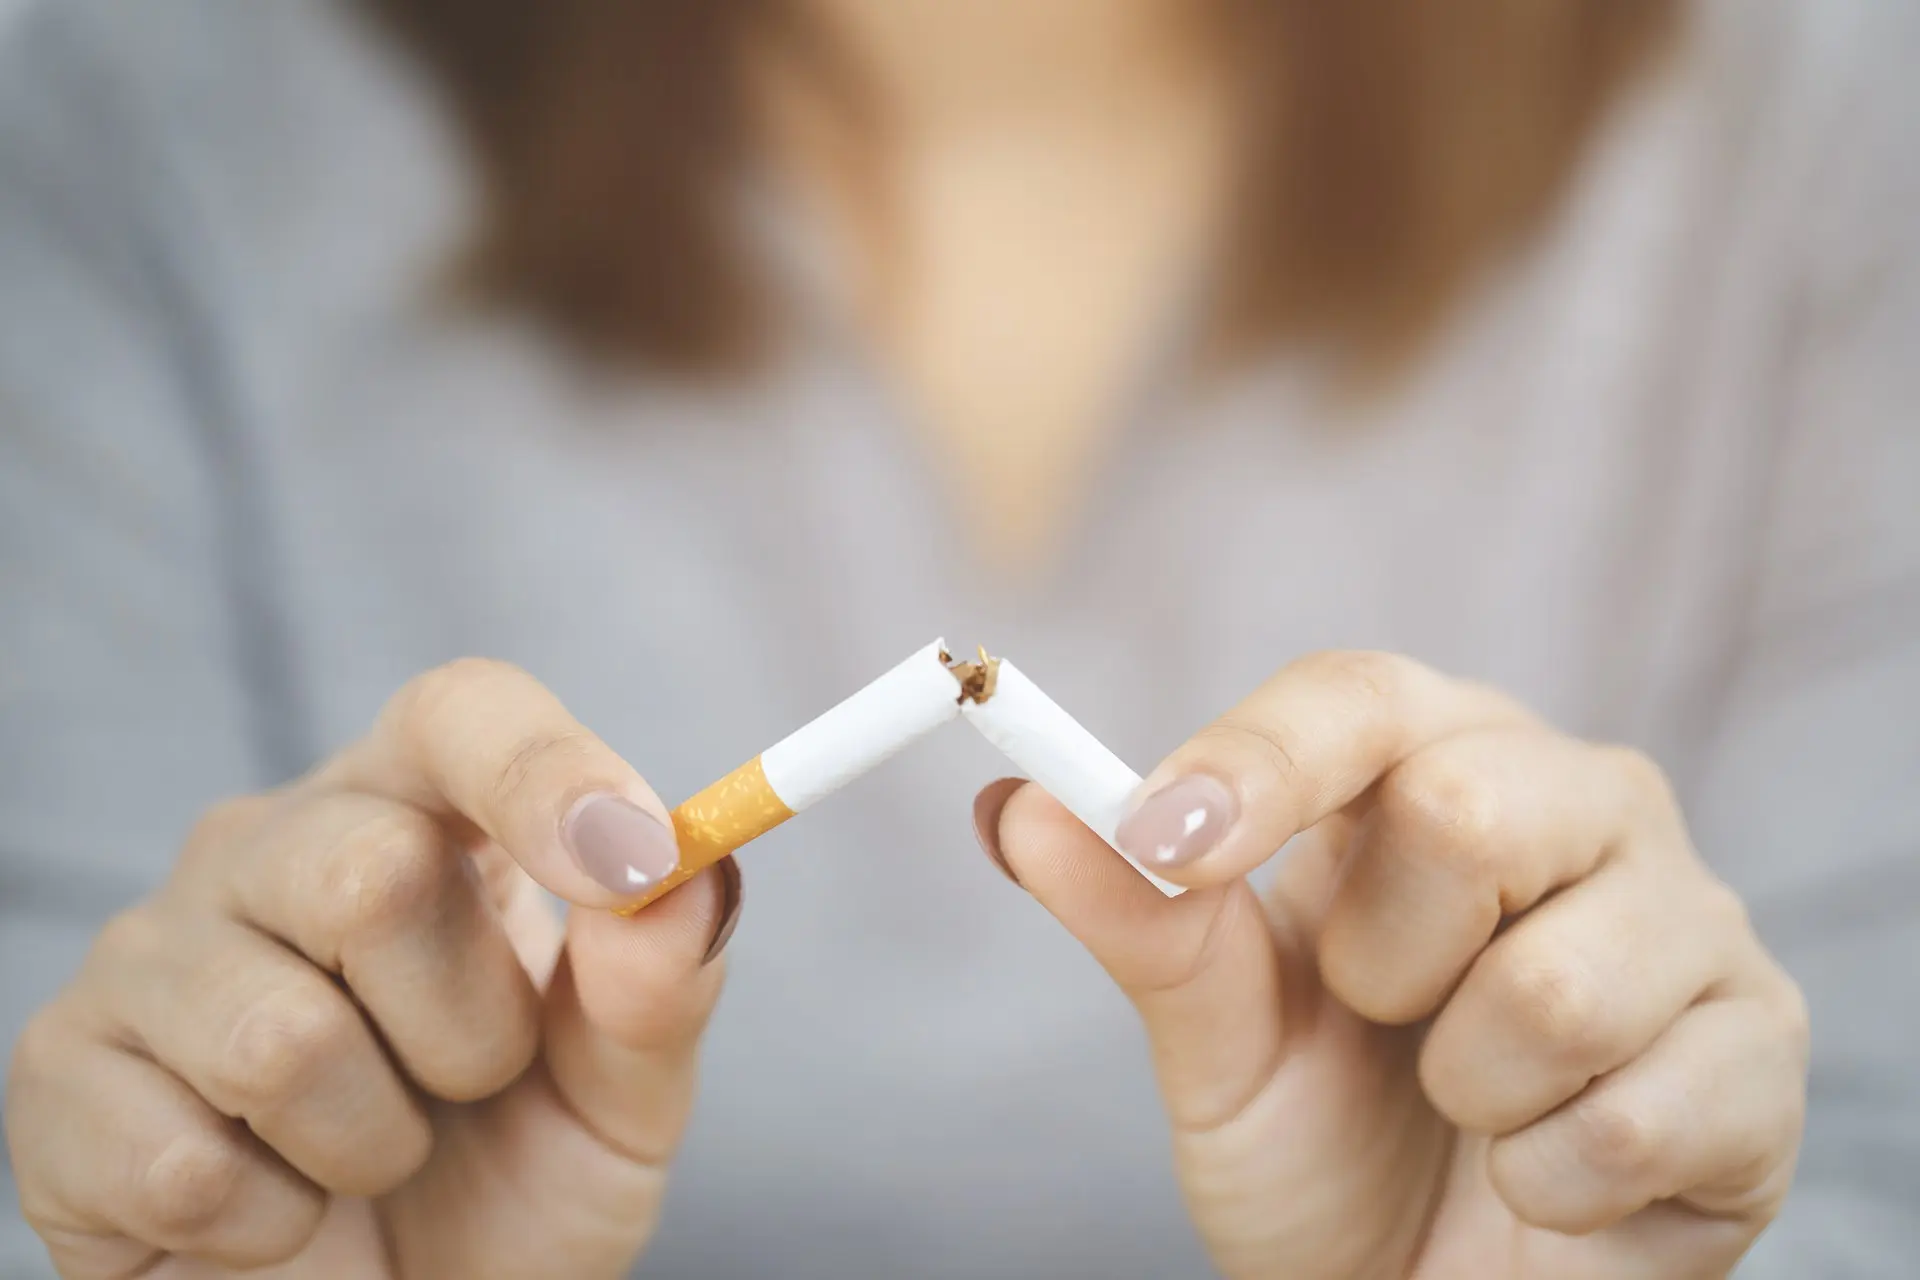 i smoked before surgery forum - How long before surgery should I stop smoking cigarettes